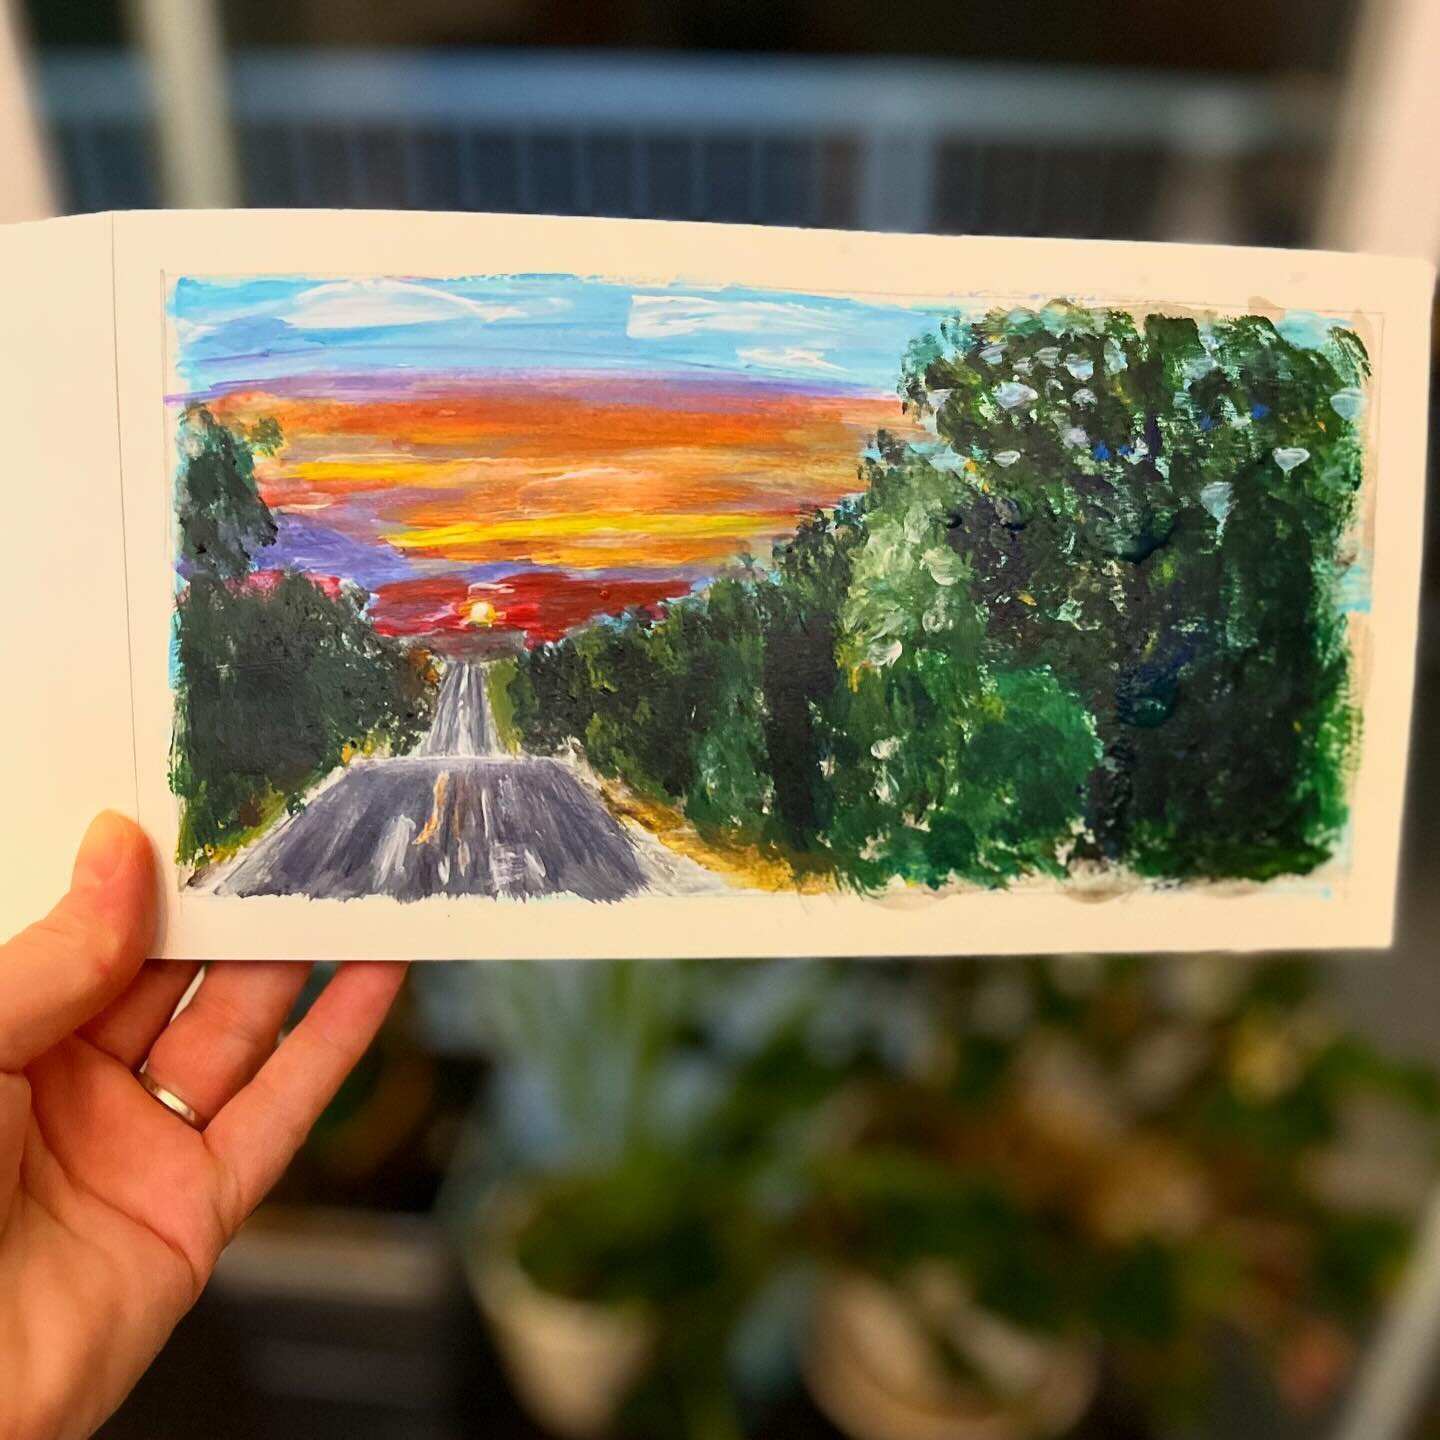 Learmont Road on the way to Perivale, sunset at the end of the road. Day 44 of the 100 day project. 

#100dayproject2024 #100dayproject #the100dayproject #manitoulinisland #sunsetpainting #chasingsunsets #womenwhopaint @dothe100dayproject #manitoulin